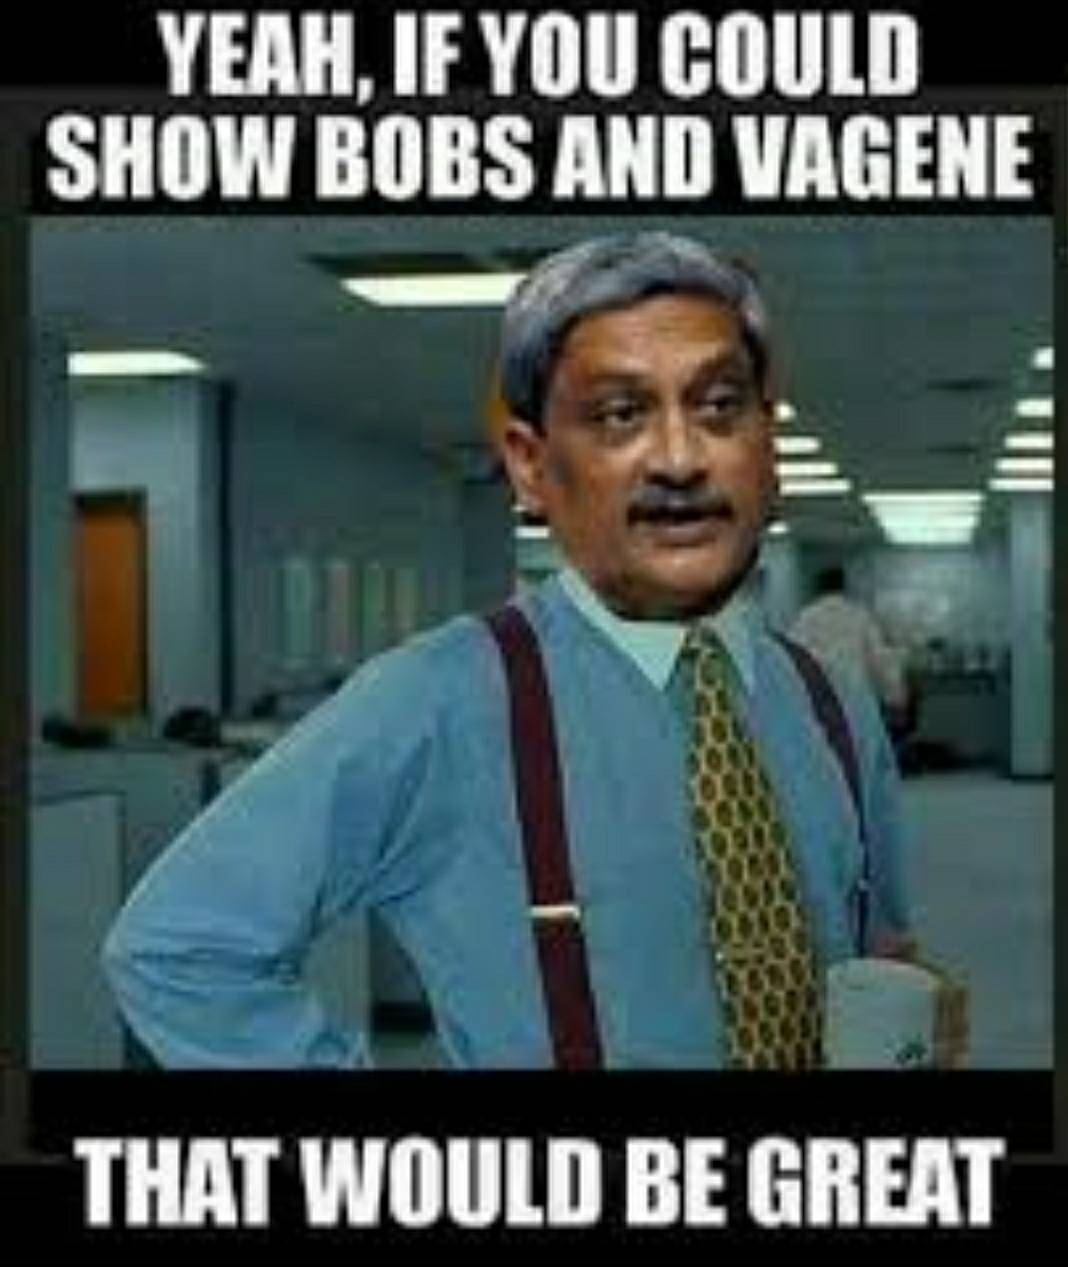 show bobs and vegene - Yeah, If You Could Show Bobs And Vagene That Would Be Great